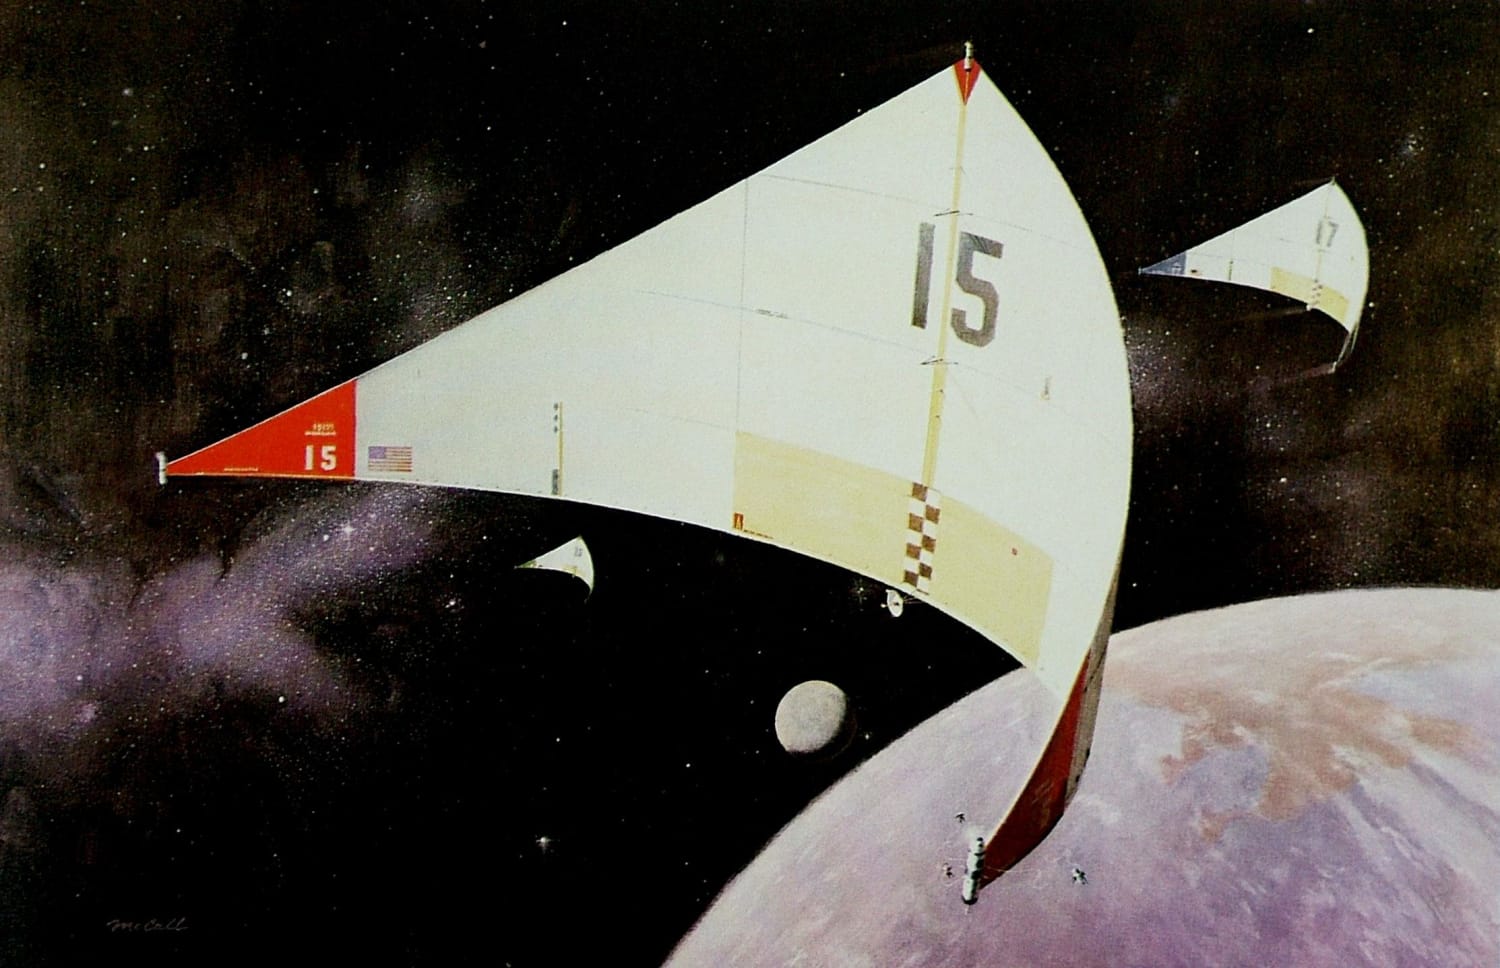 Space Sail of The Future - 30 ½” x 45 ½”, oil on canvas, 1960; collection of National Air and Space Museum